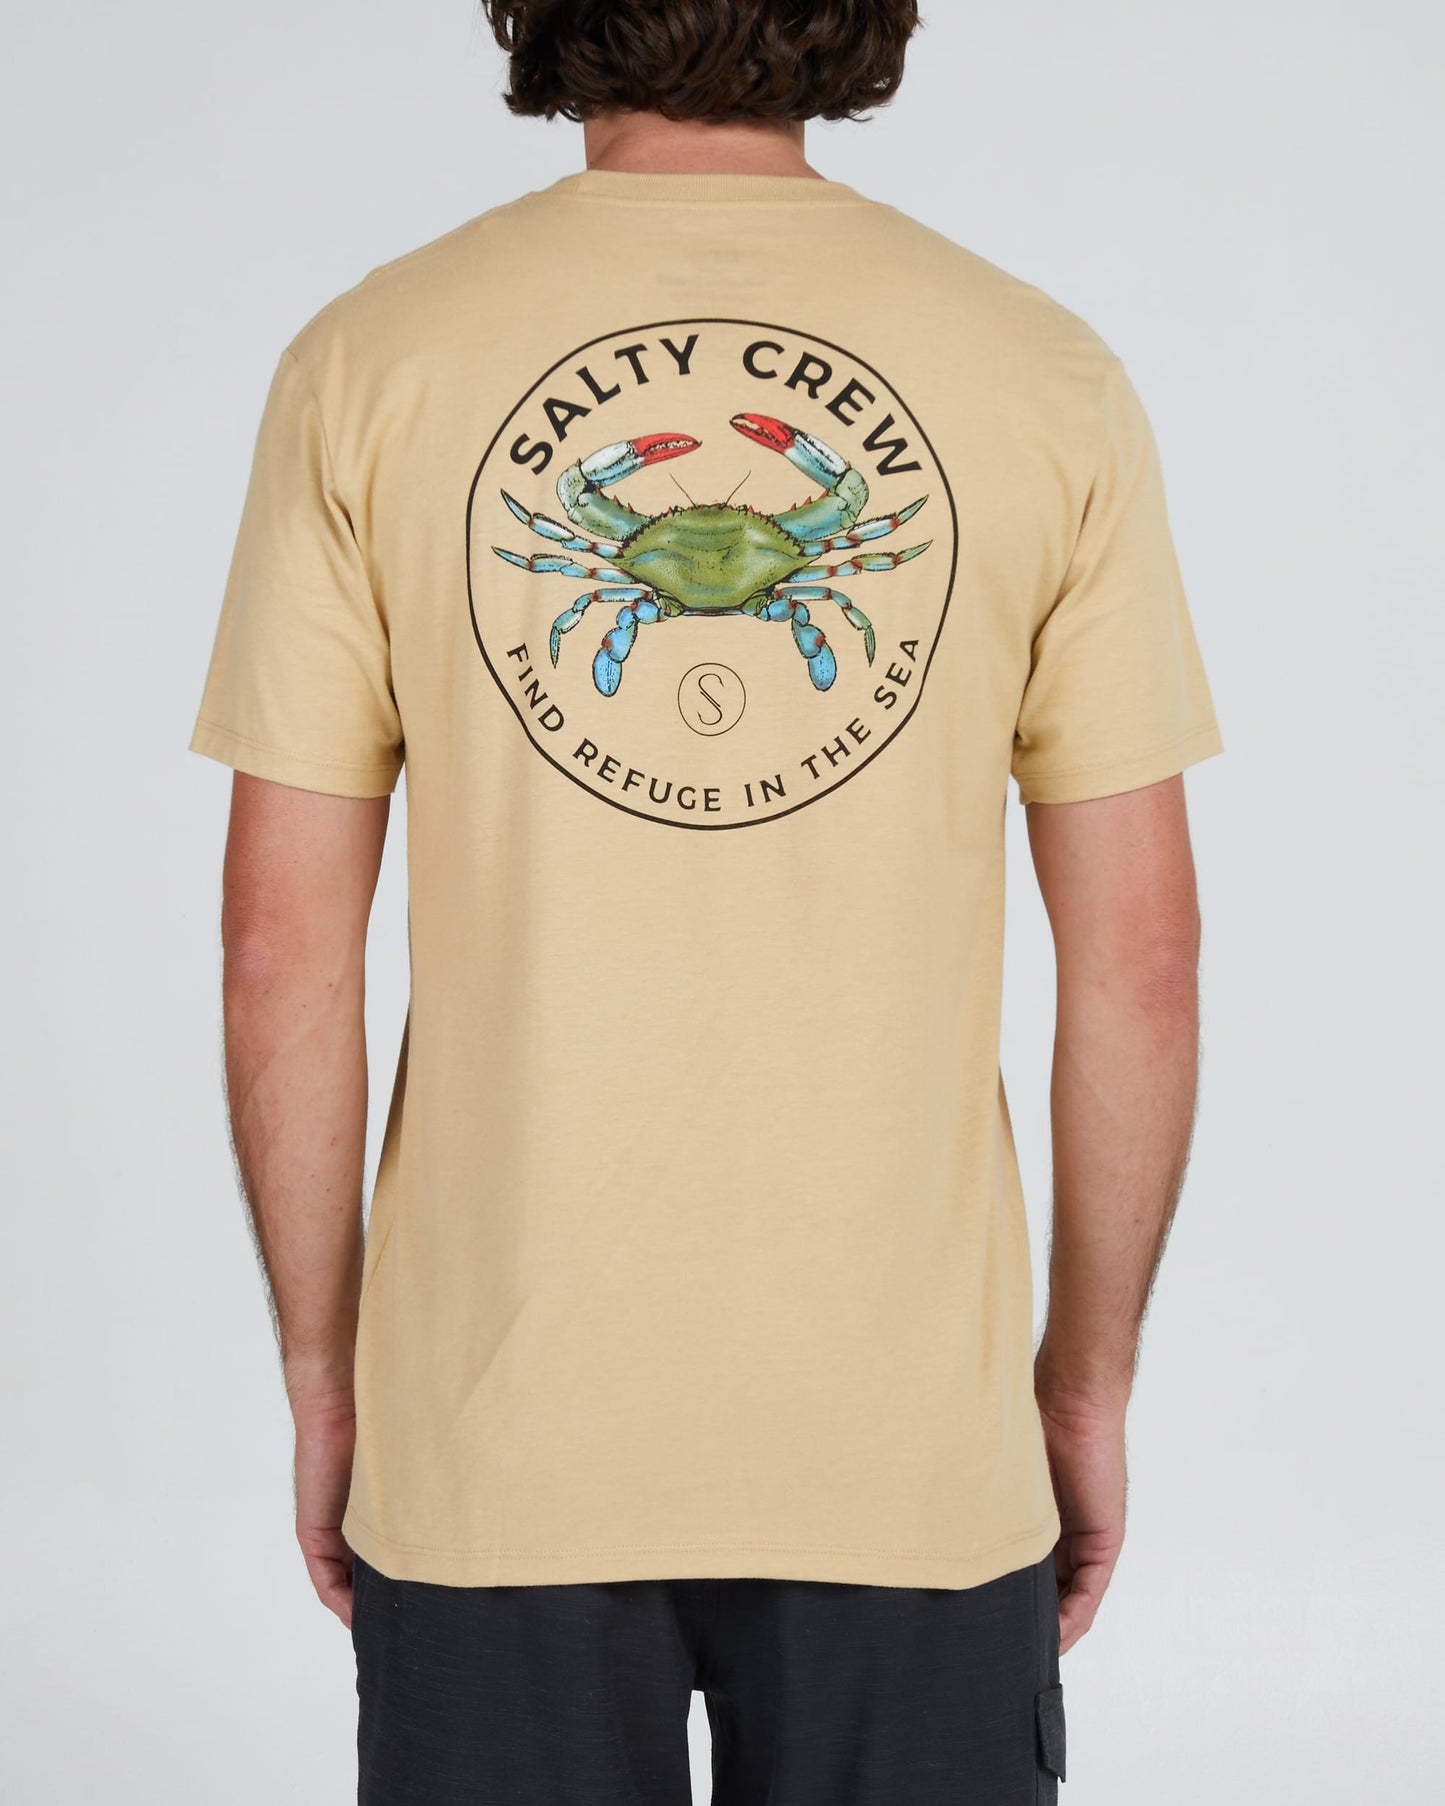 Salty crew T-SHIRTS S/S BLUE CRABBER PREMIUM S/S TEE - Camel in Camel